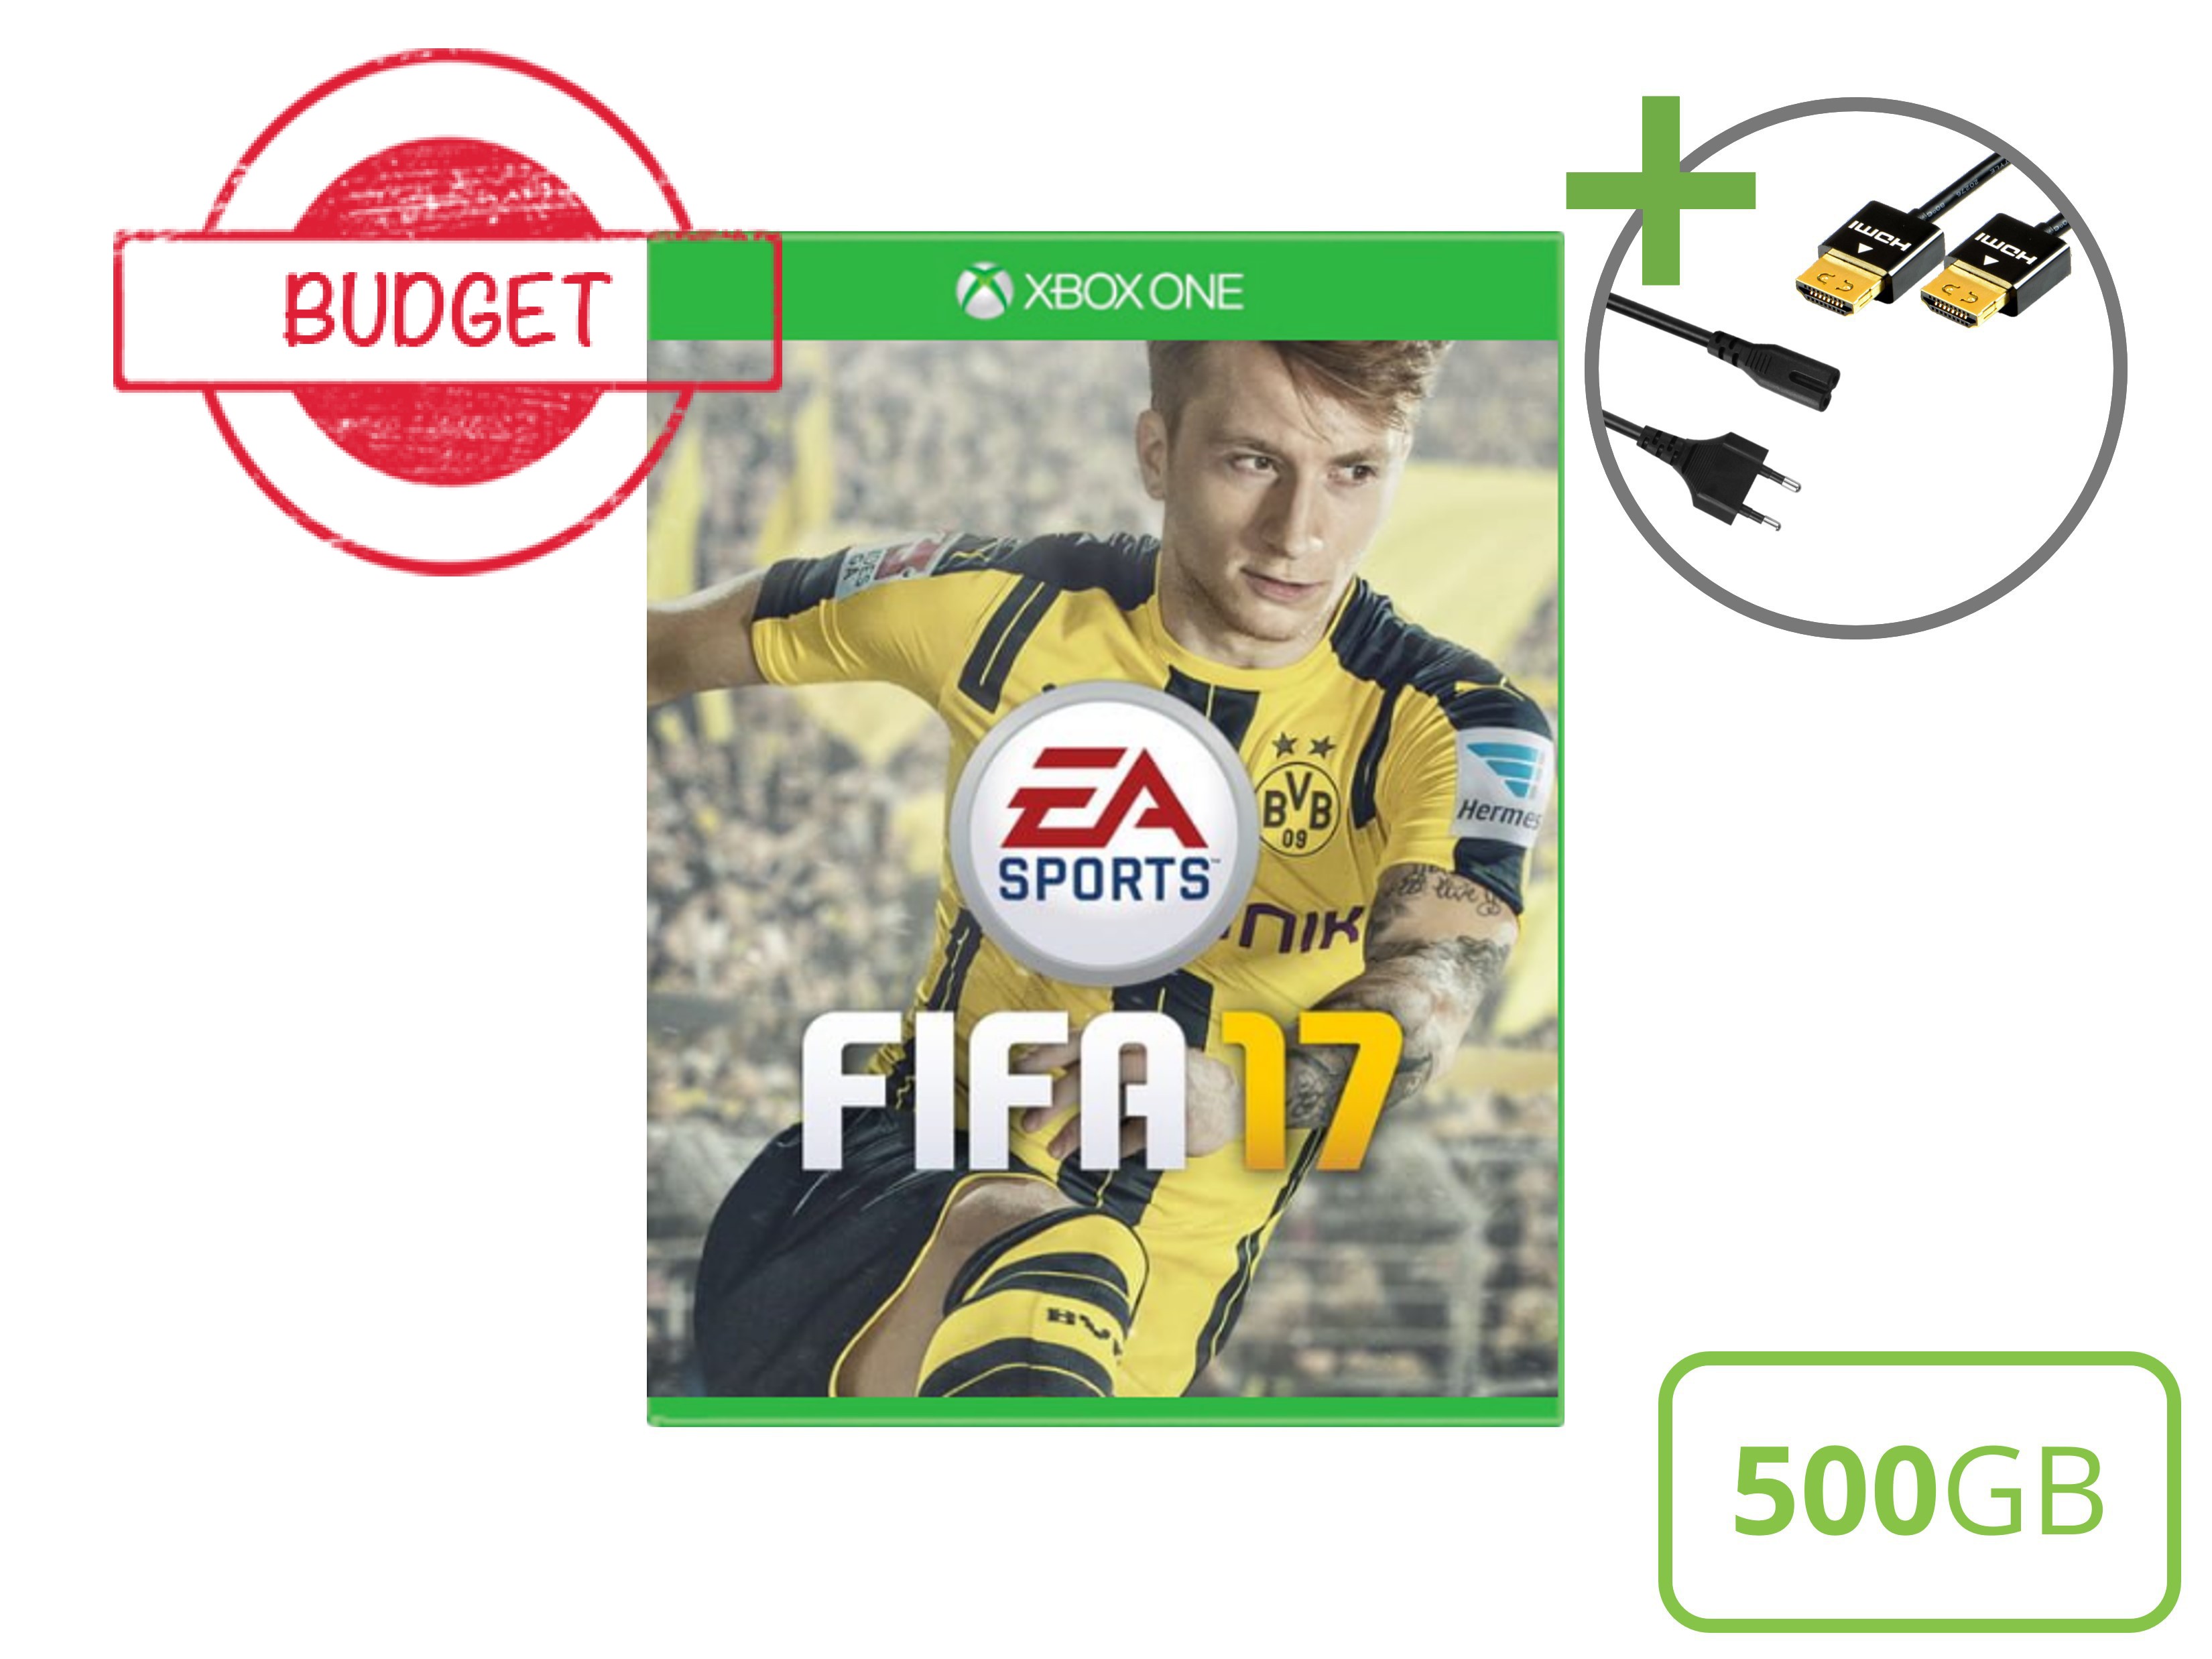 Microsoft Xbox One S Starter Pack - 500GB FIFA 17 Edition - Budget - Xbox One Hardware - 4